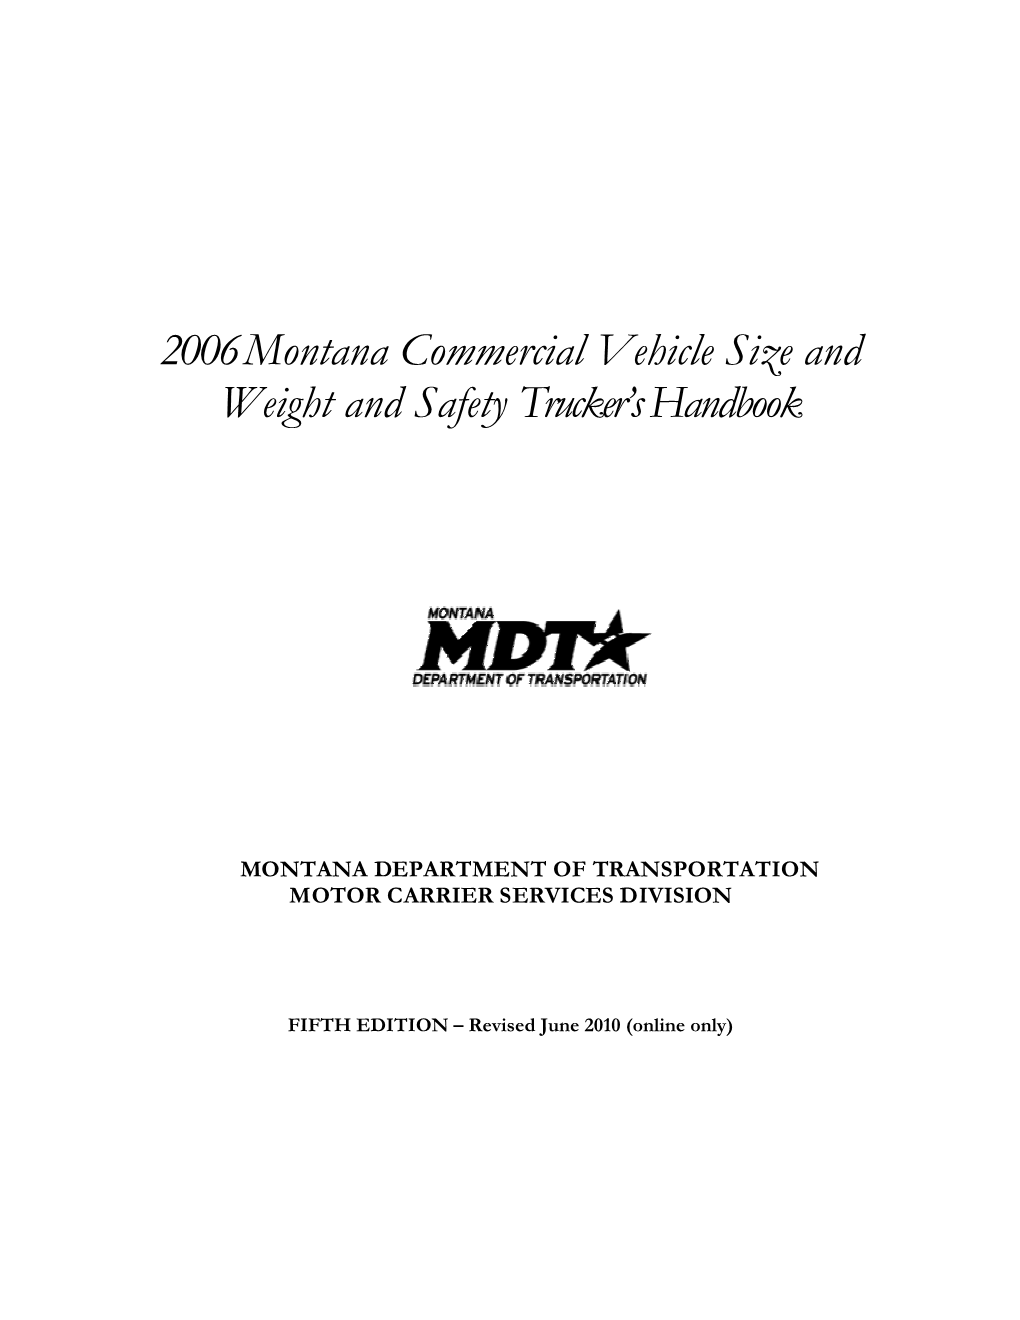 2006Montana Commercial Vehicle Size and Weight and Safety